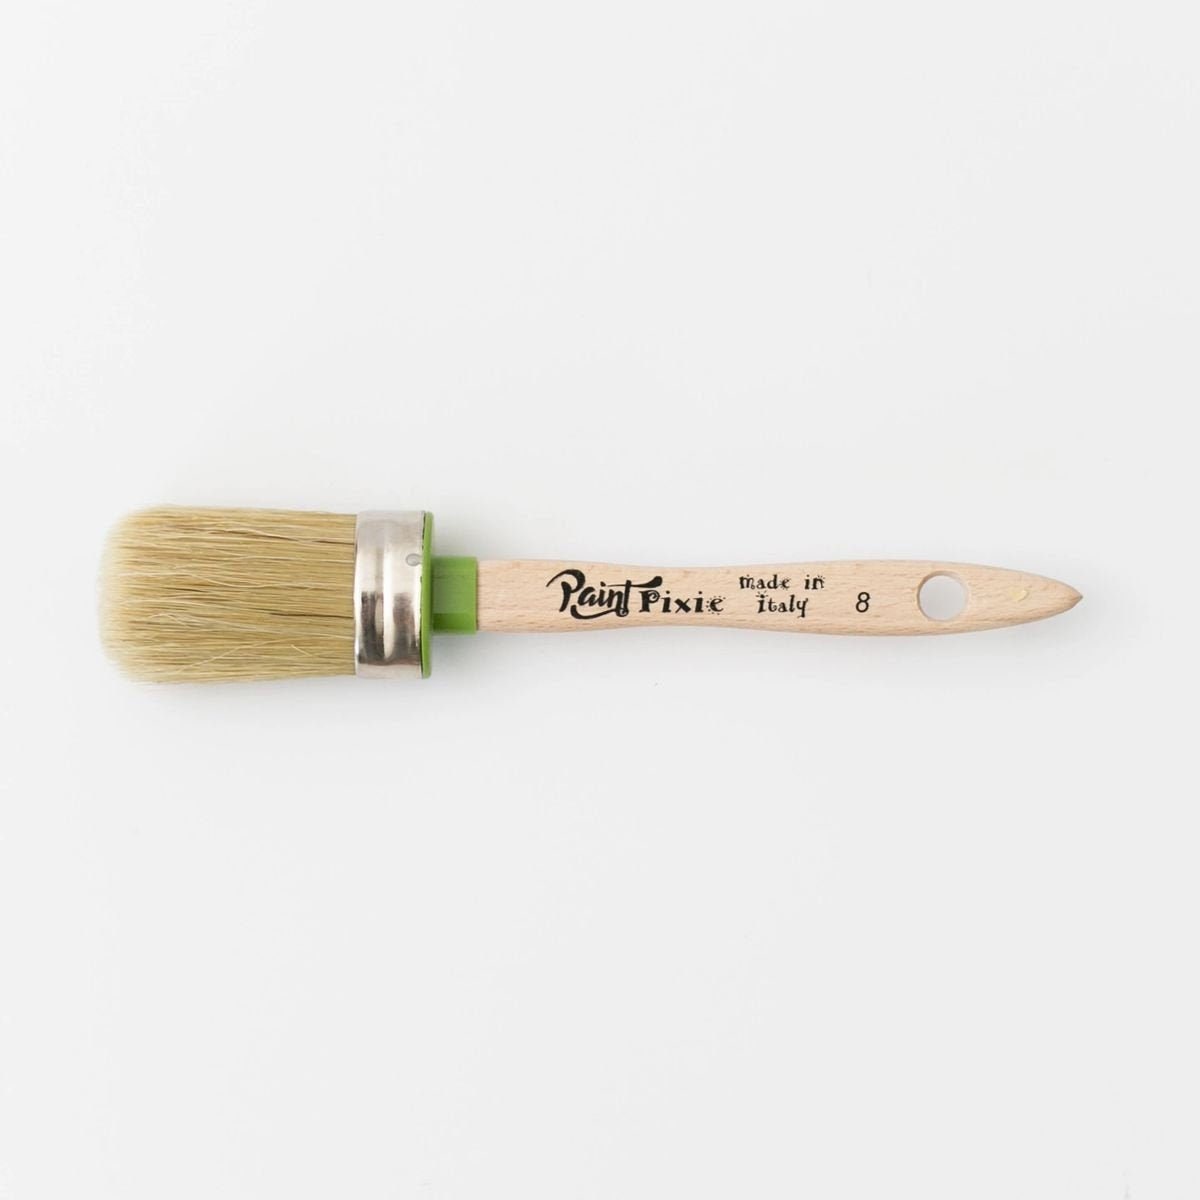 Stipley (Stencil, Stippling or Wax) Brush Paint Pixie Brushes